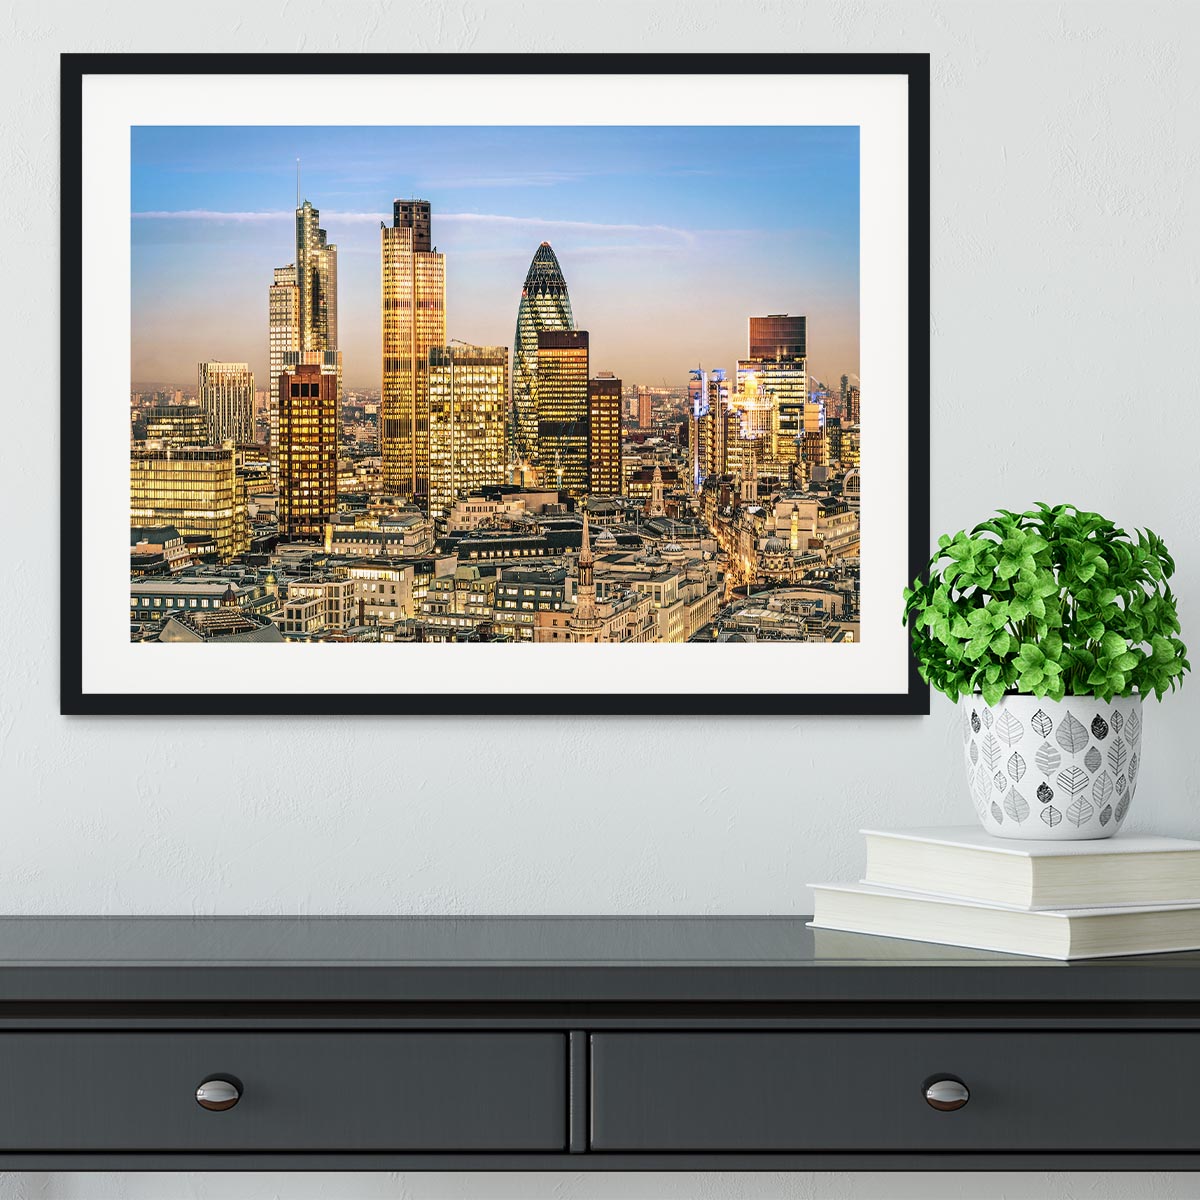 Stock Exchange Tower and Lloyds of London Framed Print - Canvas Art Rocks - 1